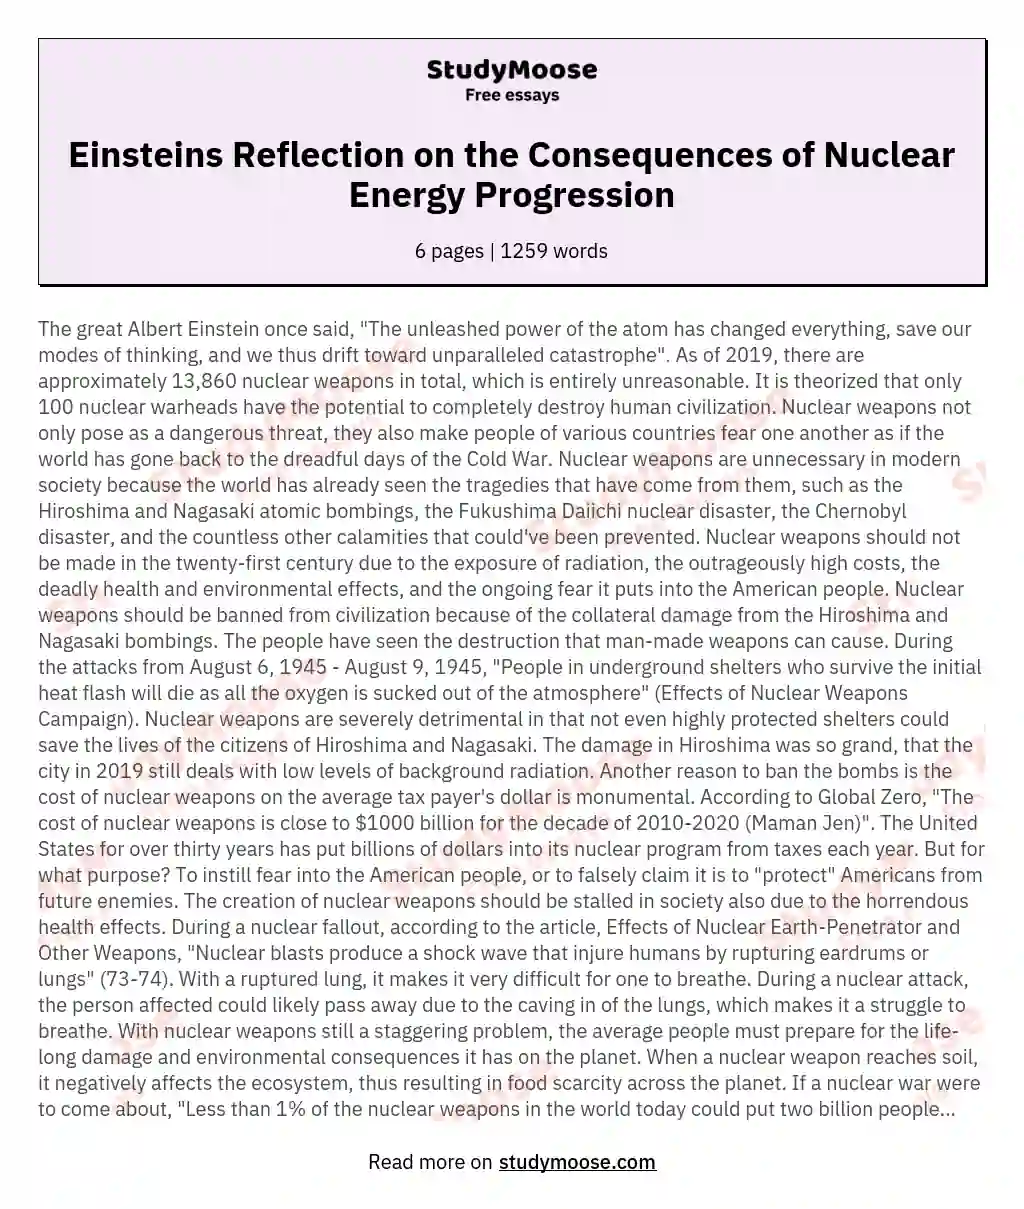 Einsteins Reflection on the Consequences of Nuclear Energy Progression essay